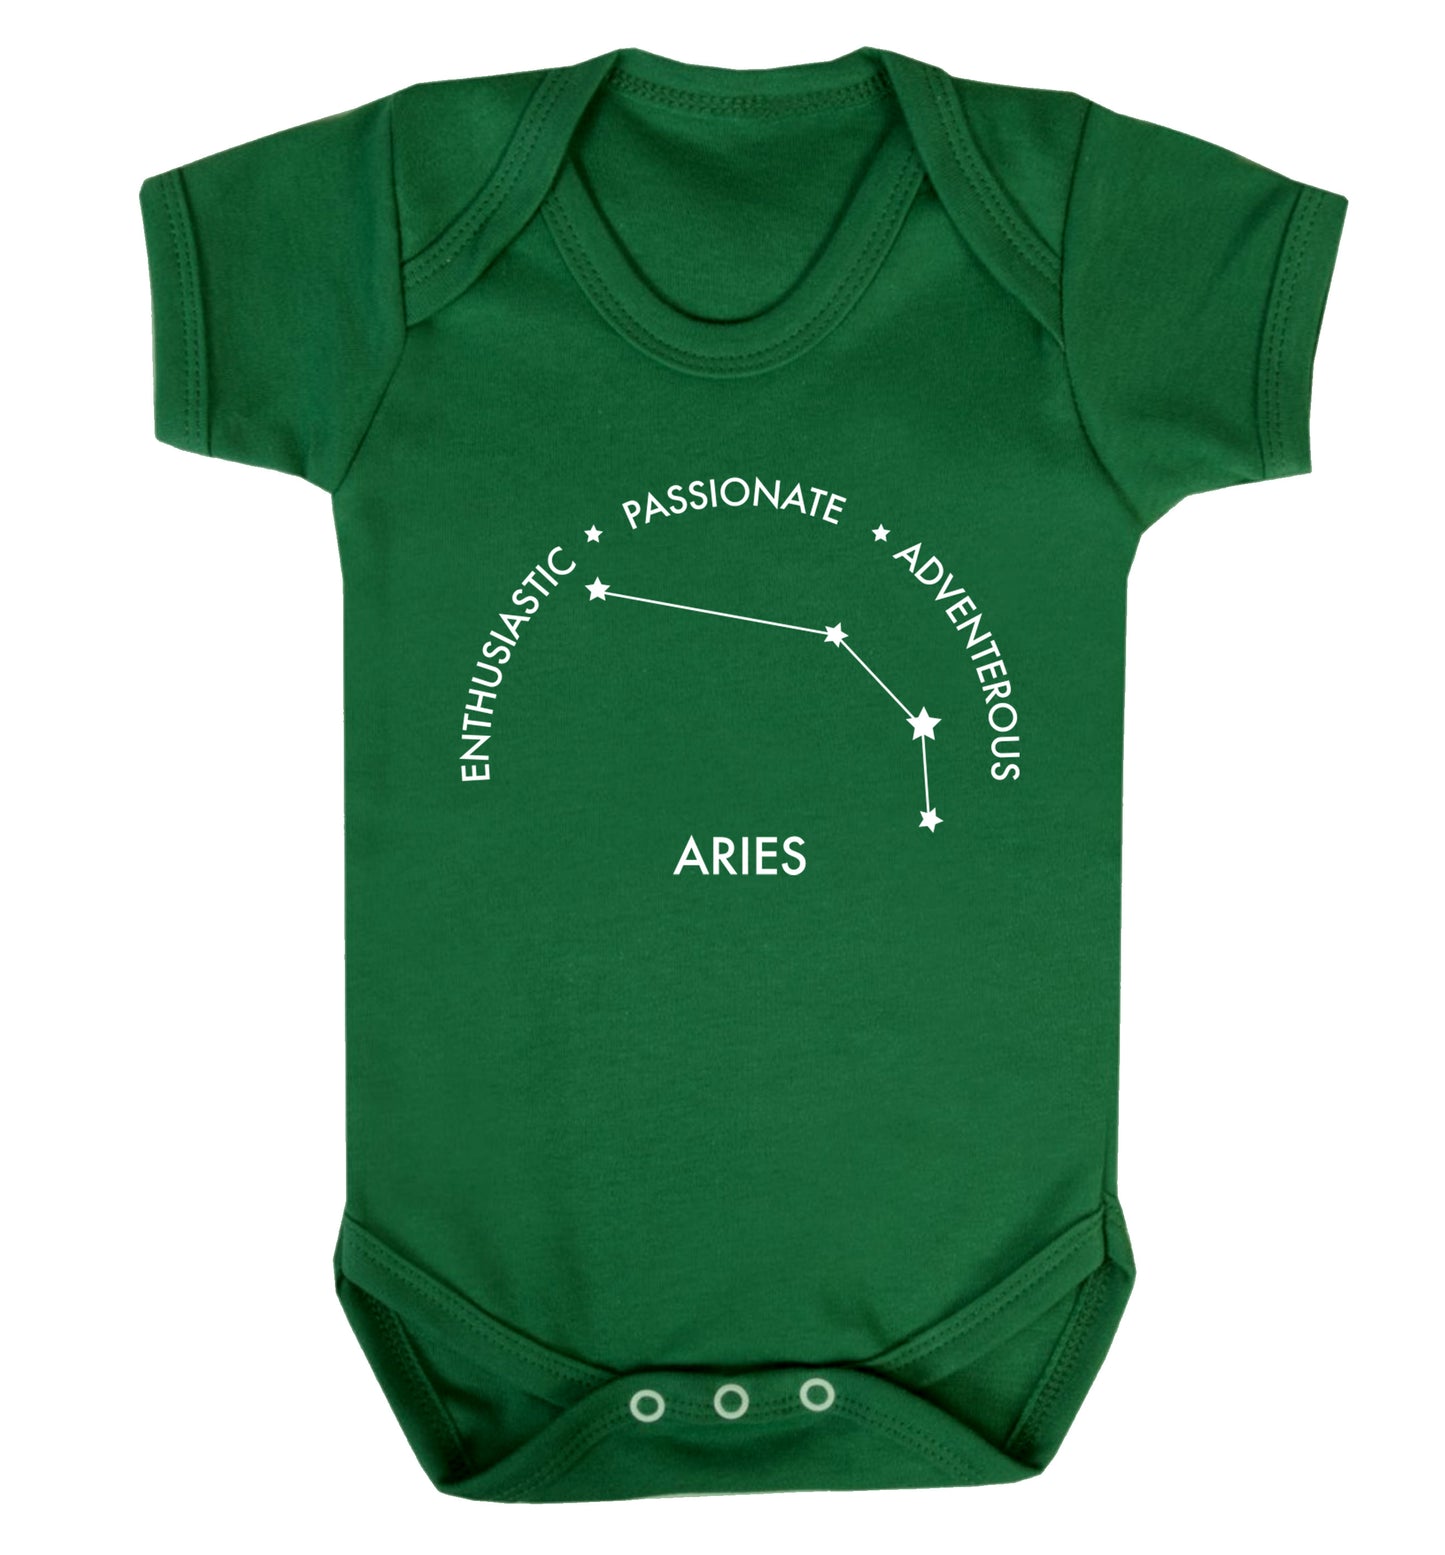 Aries enthusiastic | passionate | adventerous Baby Vest green 18-24 months